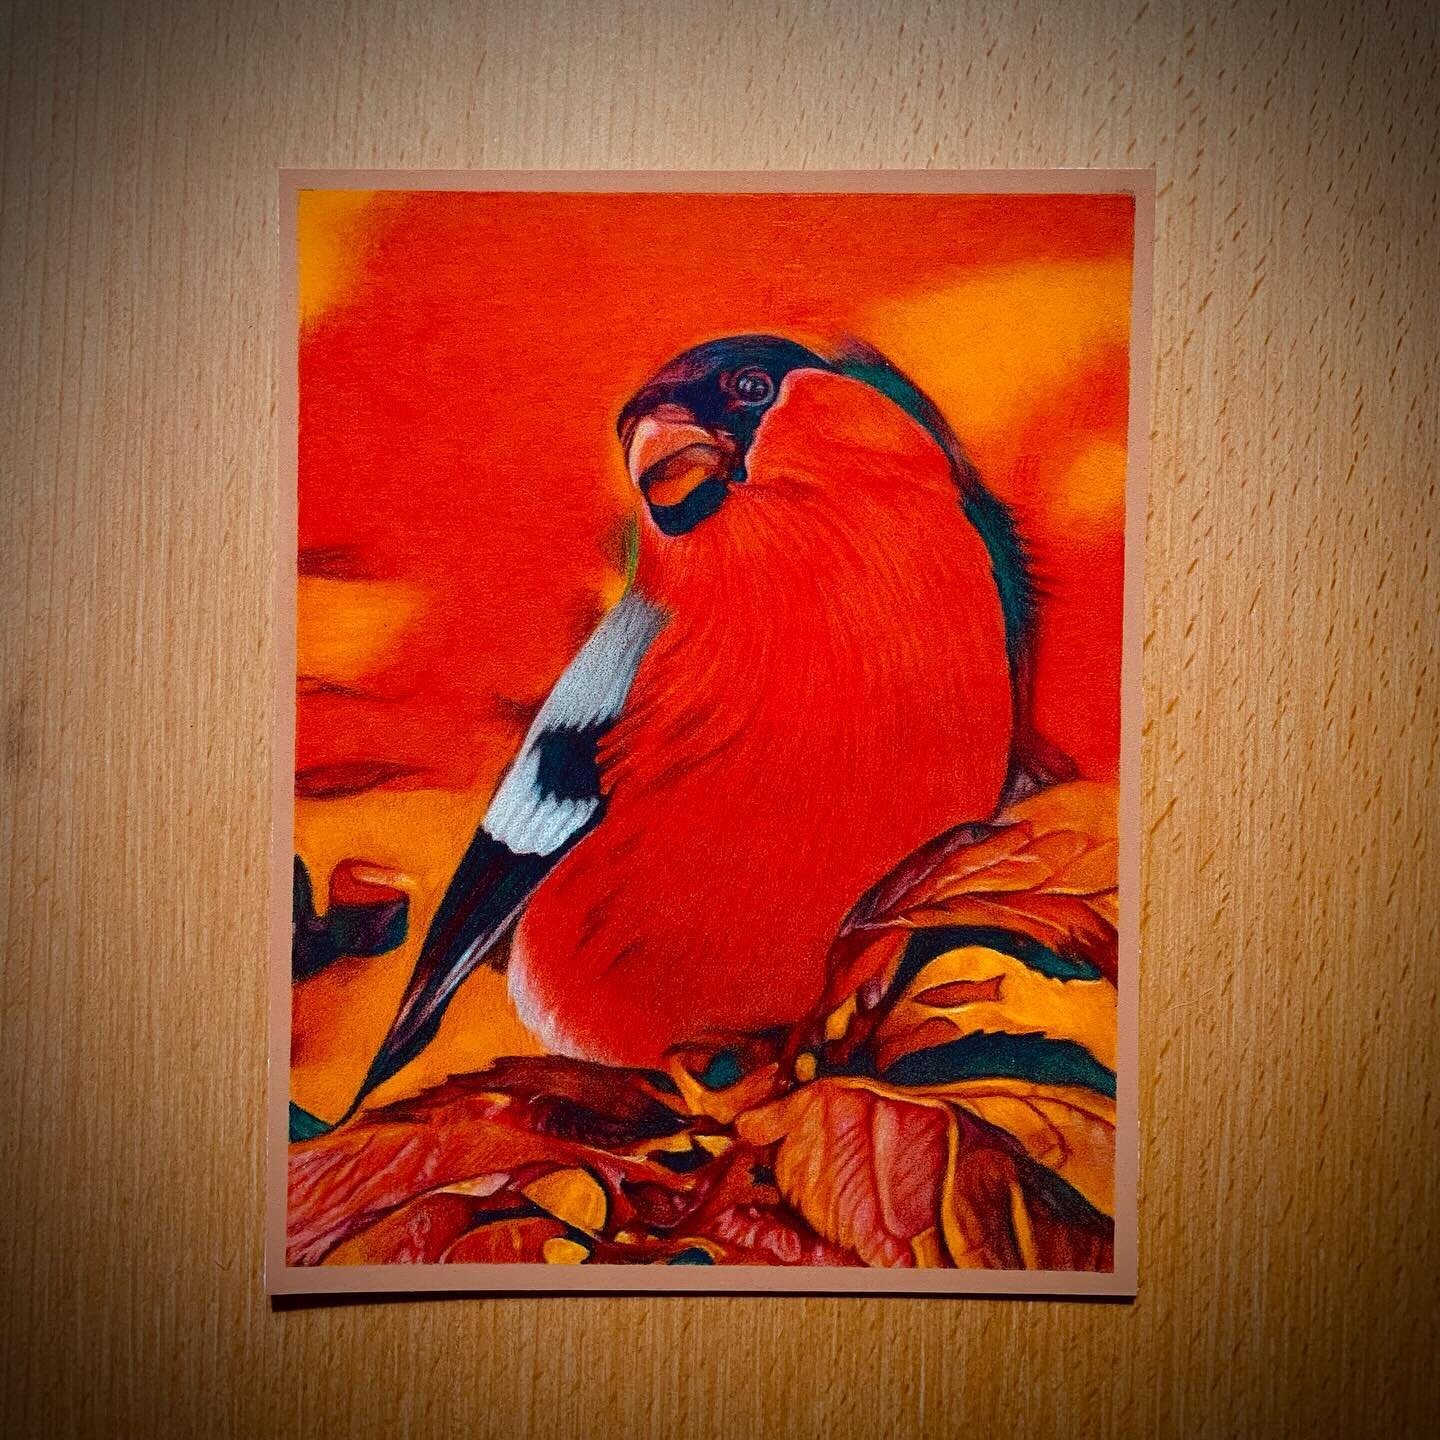 Artist Support Pledge&hellip;

100GBP

&lsquo;Bullfinch&rsquo;
Polychromos pencils on pastelmat paper, 17.5 x 13.5cm

(Unframed - frame pic for illustration only)

Please DM me if interested!

ARTIST SUPPORT PLEDGE supporting artists and makers.

The